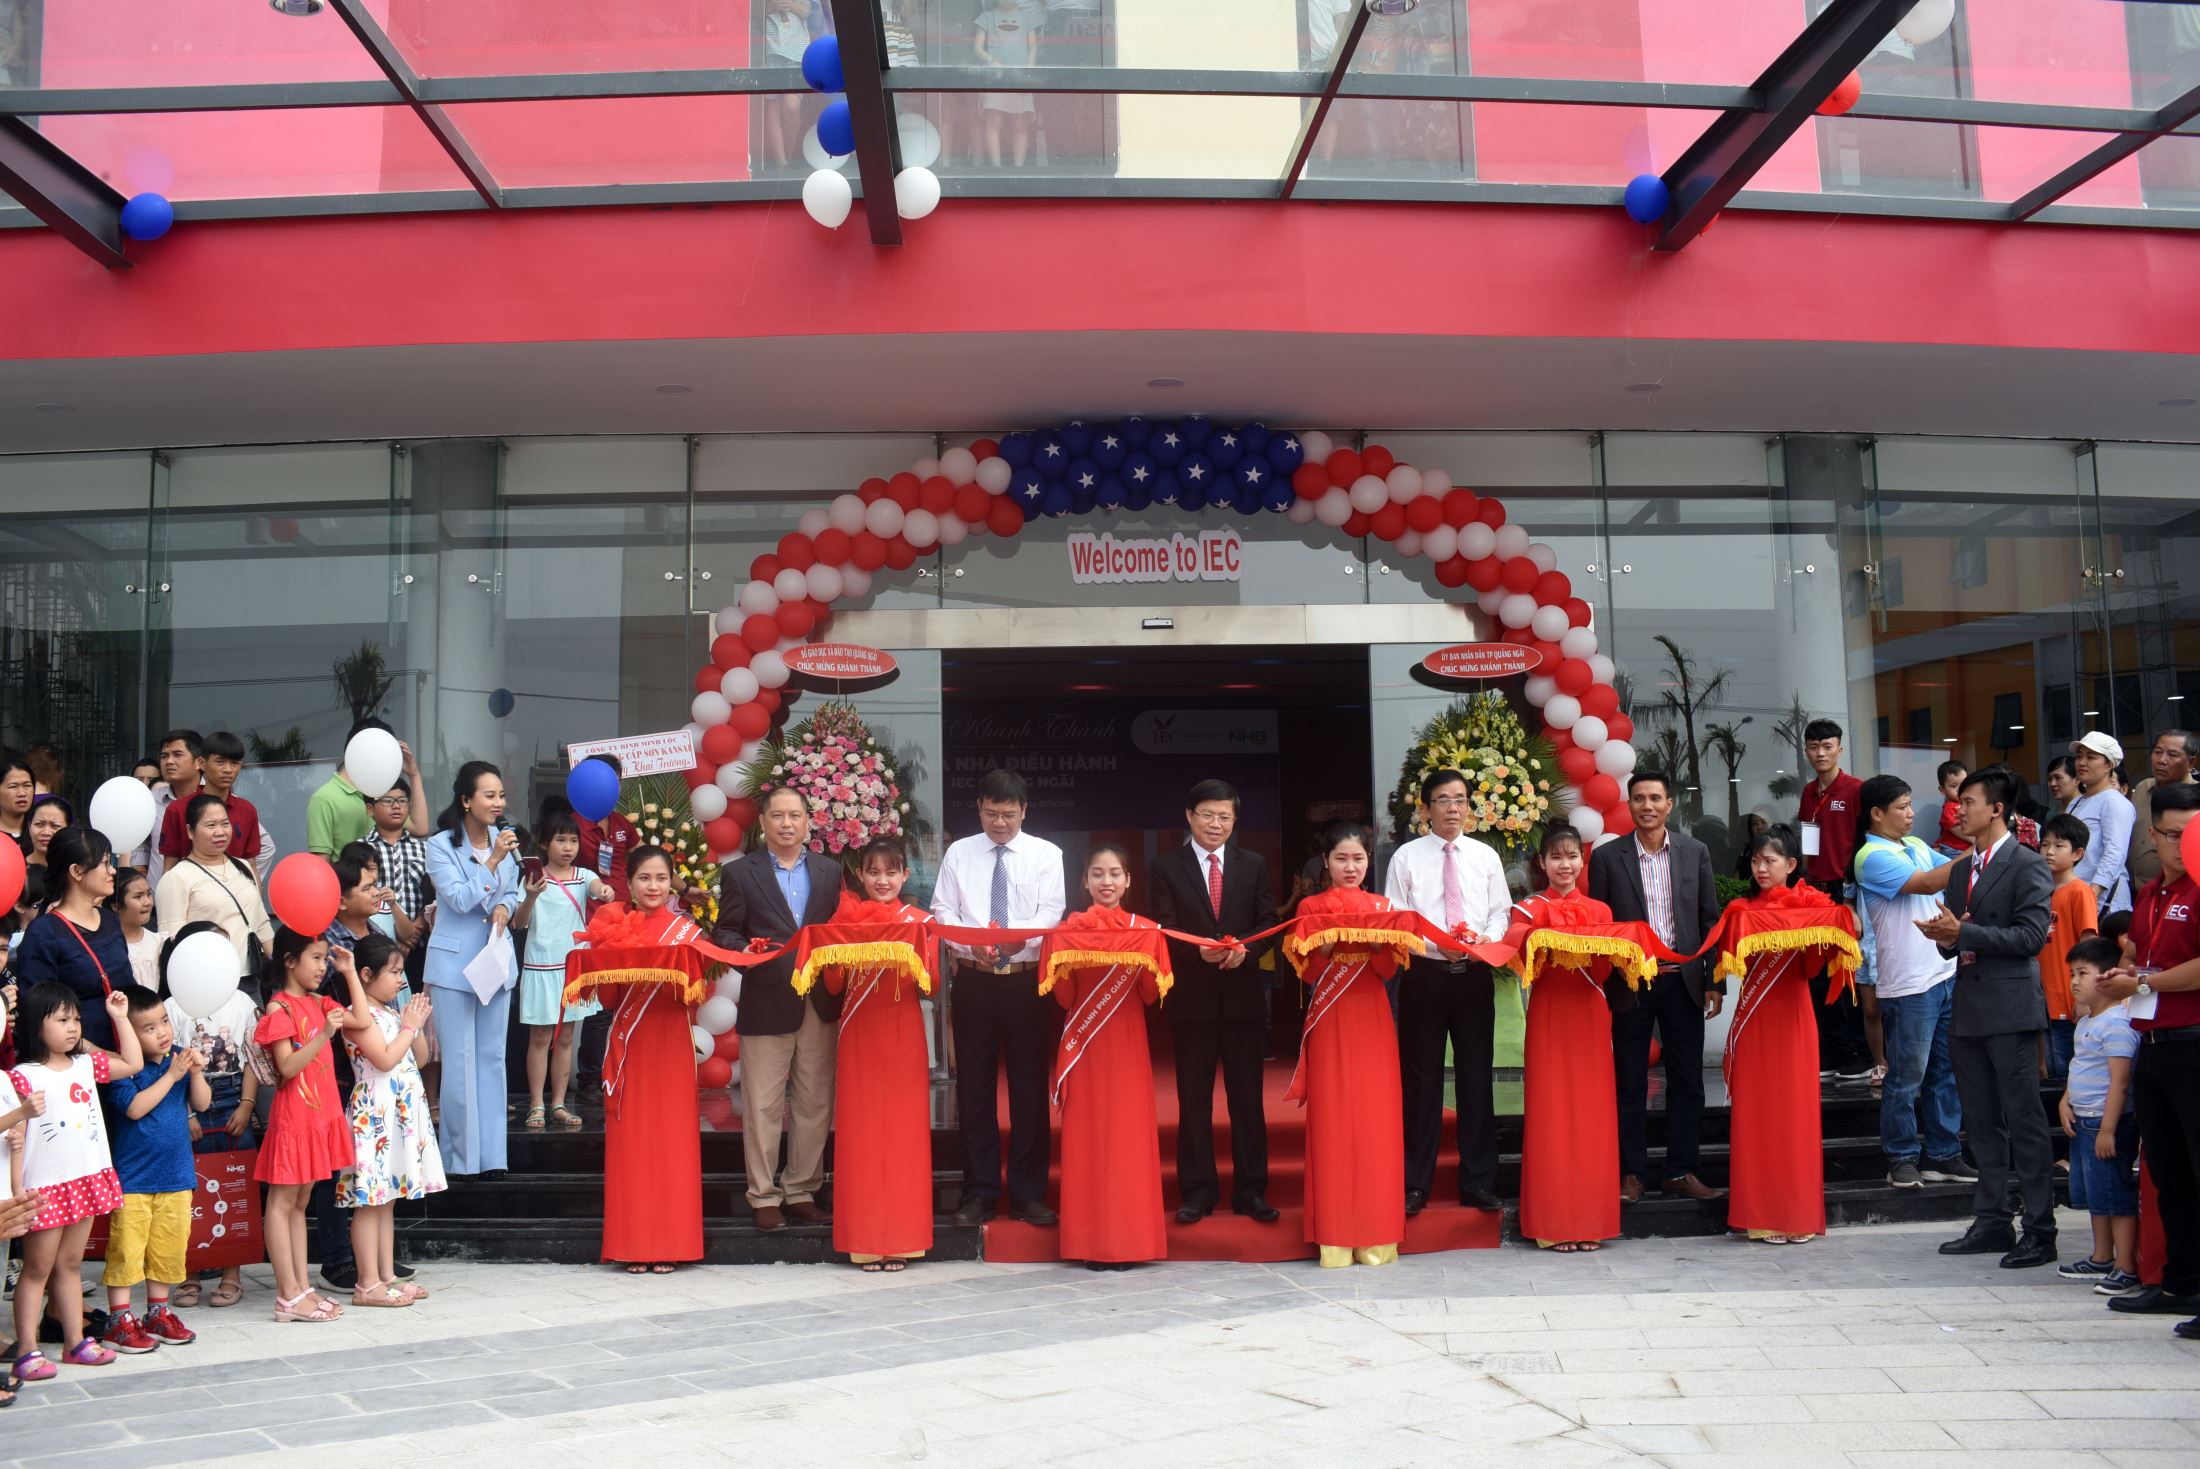 The leaders of Quang Ngai province and Nguyen Hoang Group cut the ribbon to inaugurate the central admin block - IEC Quang Ngai.